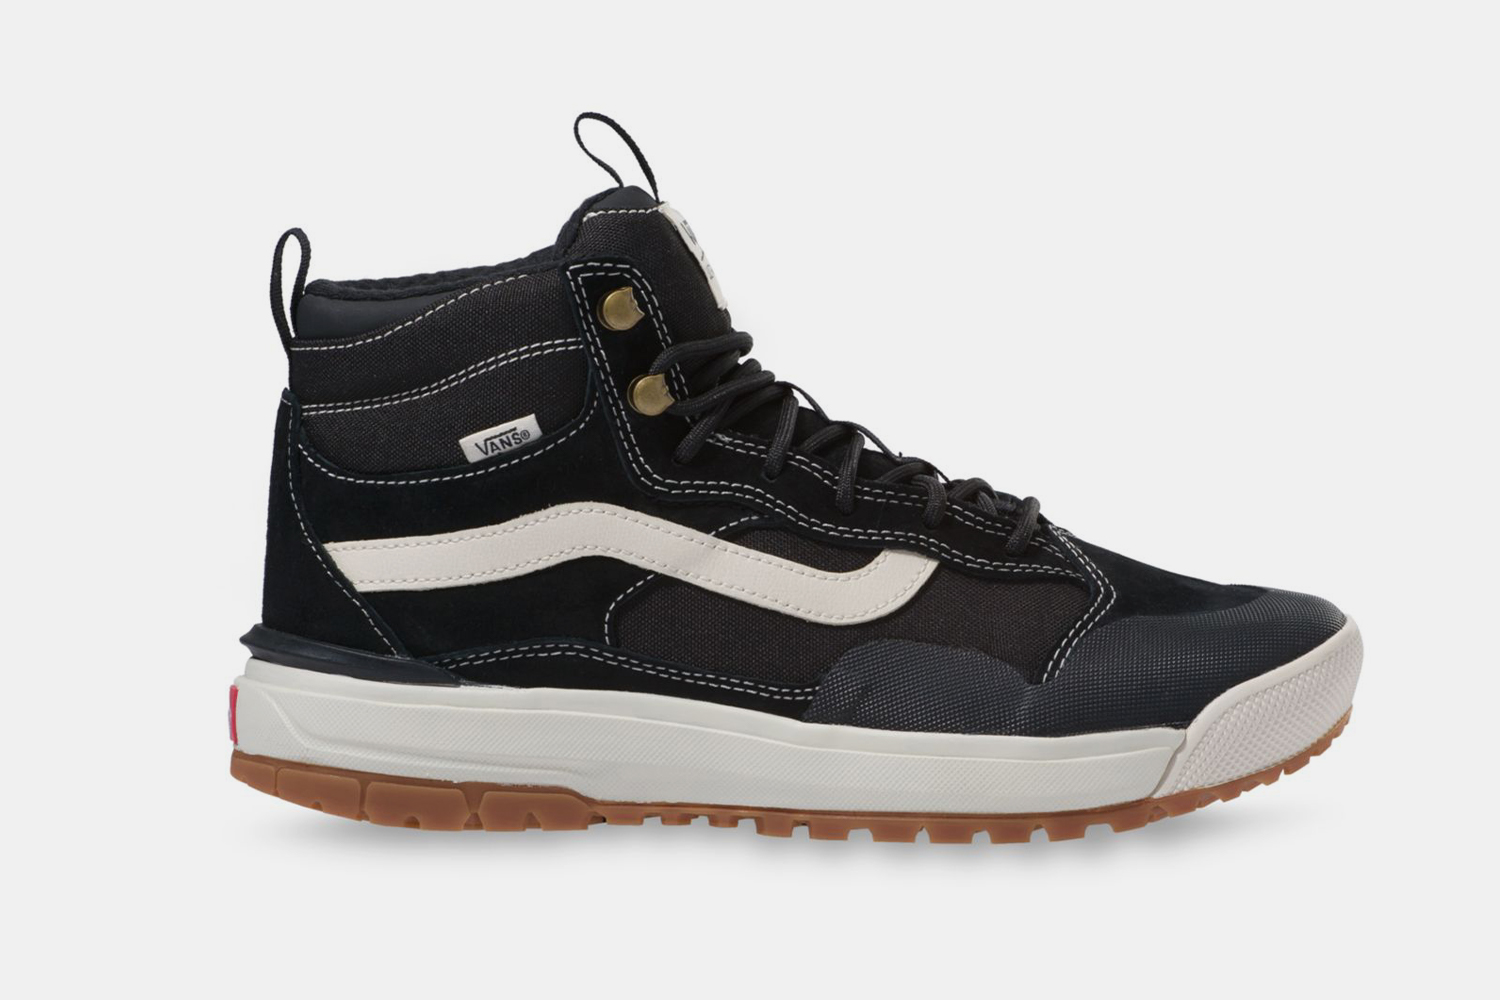 Deal: These Vans Sneaker Boots - Off InsideHook $20 Are